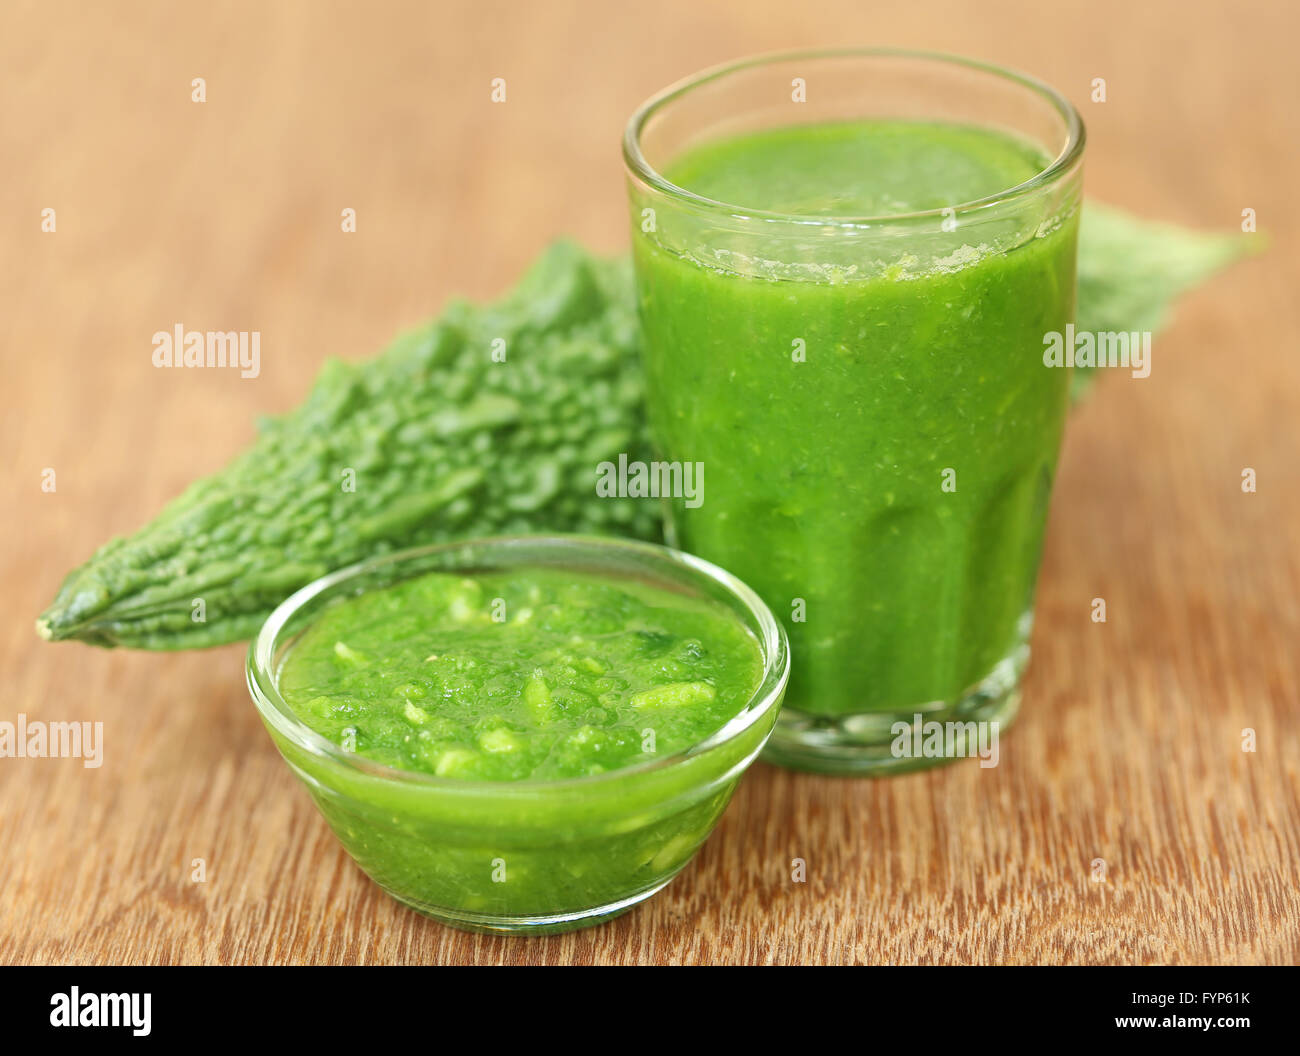 Herbal juice of green momodica with green vegetable Stock Photo